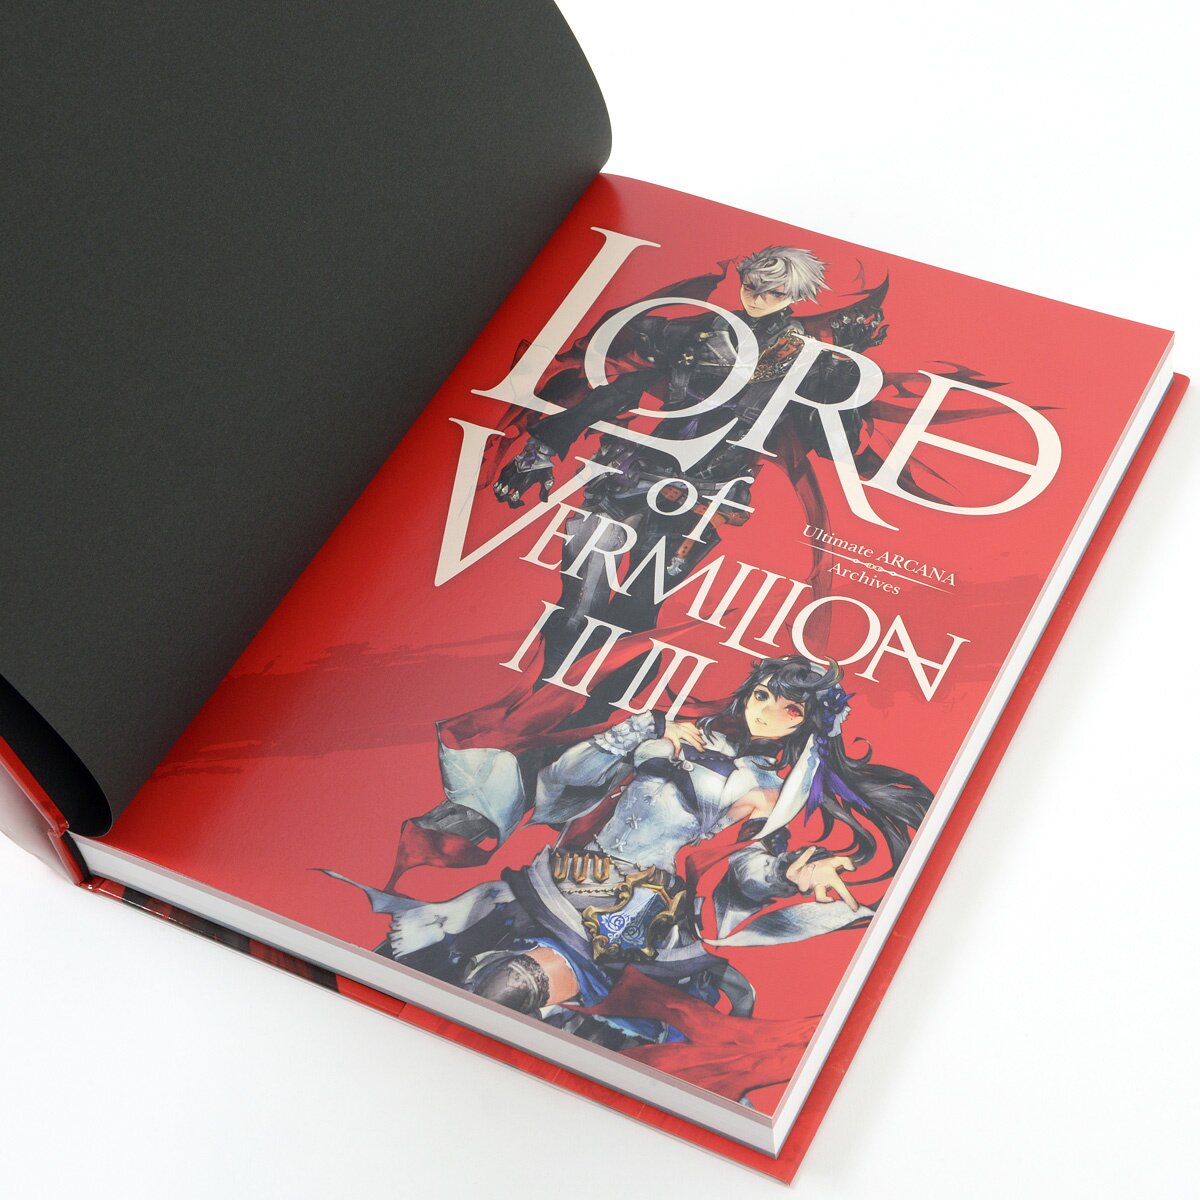 Lord of Vermilion I II III Ultimate Arcana Archives - Tokyo